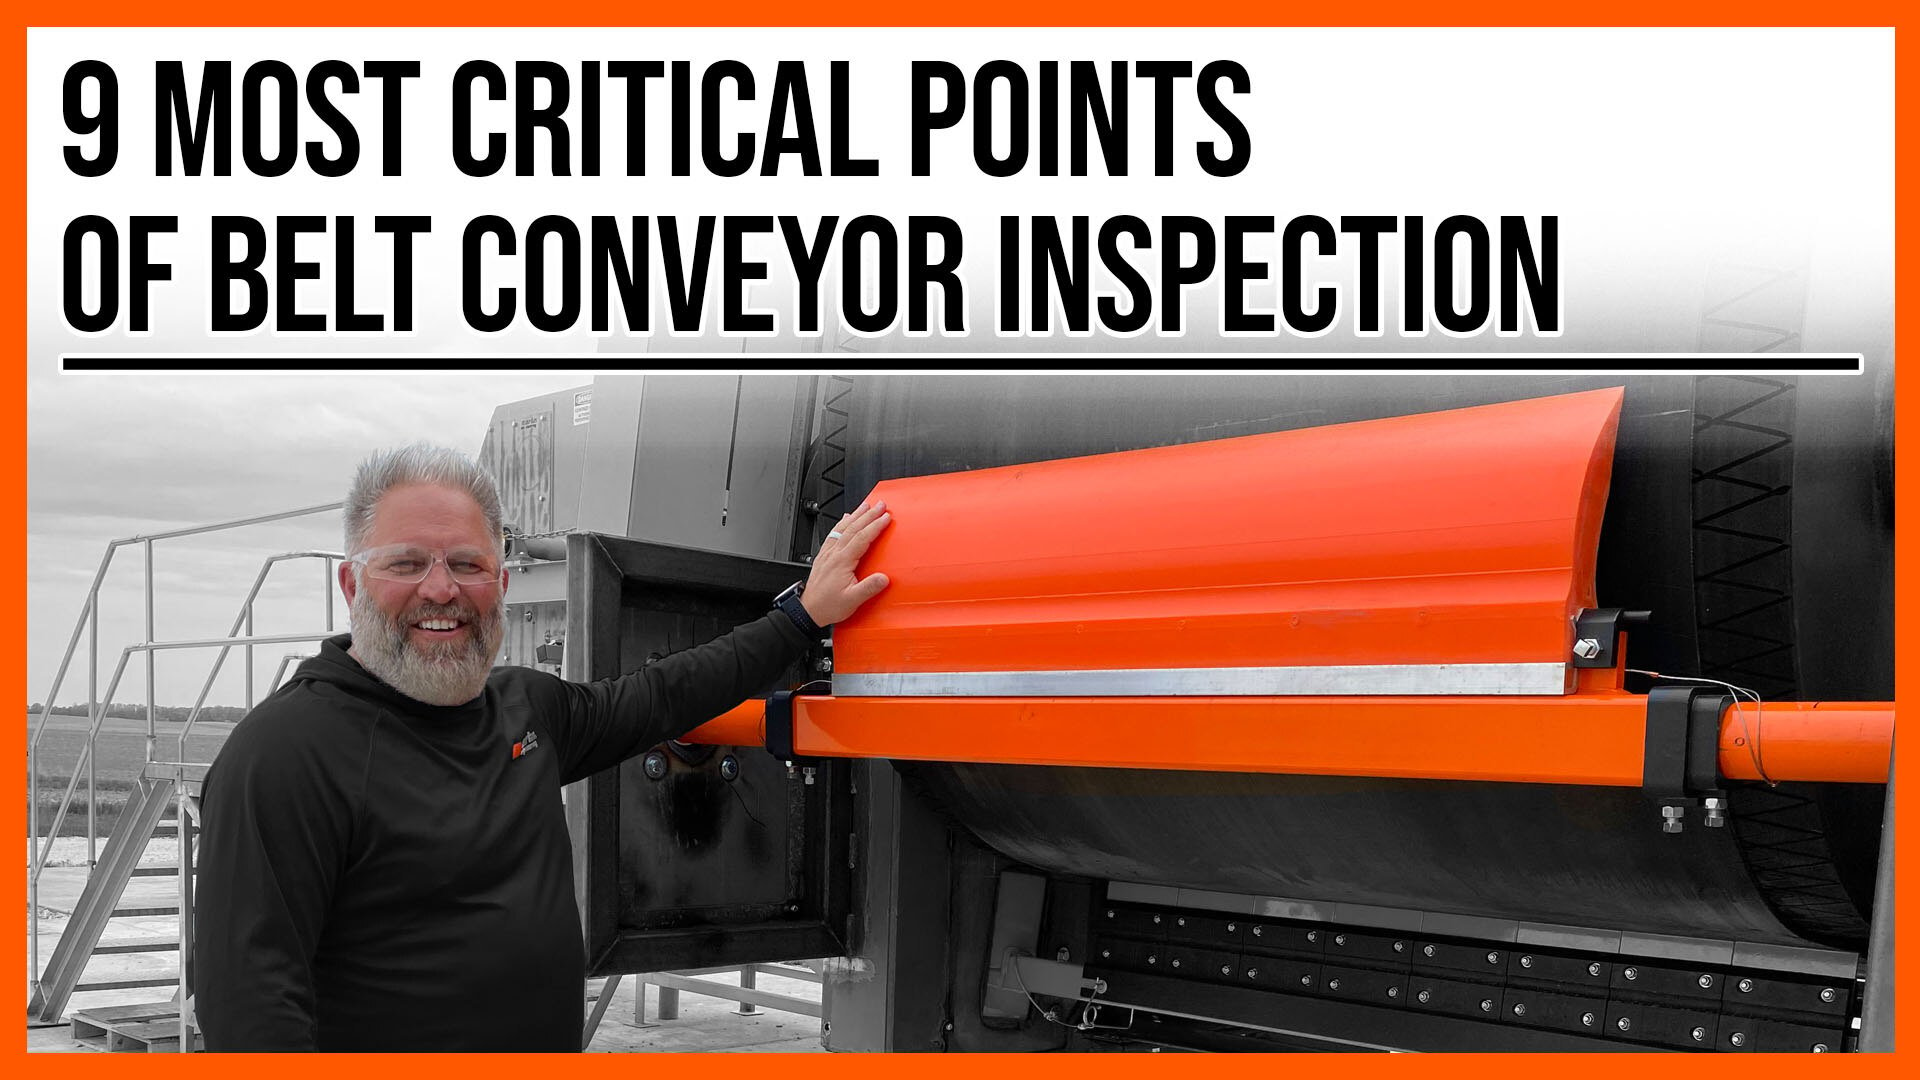 9 Most Critical Points of Belt Conveyor Inspection